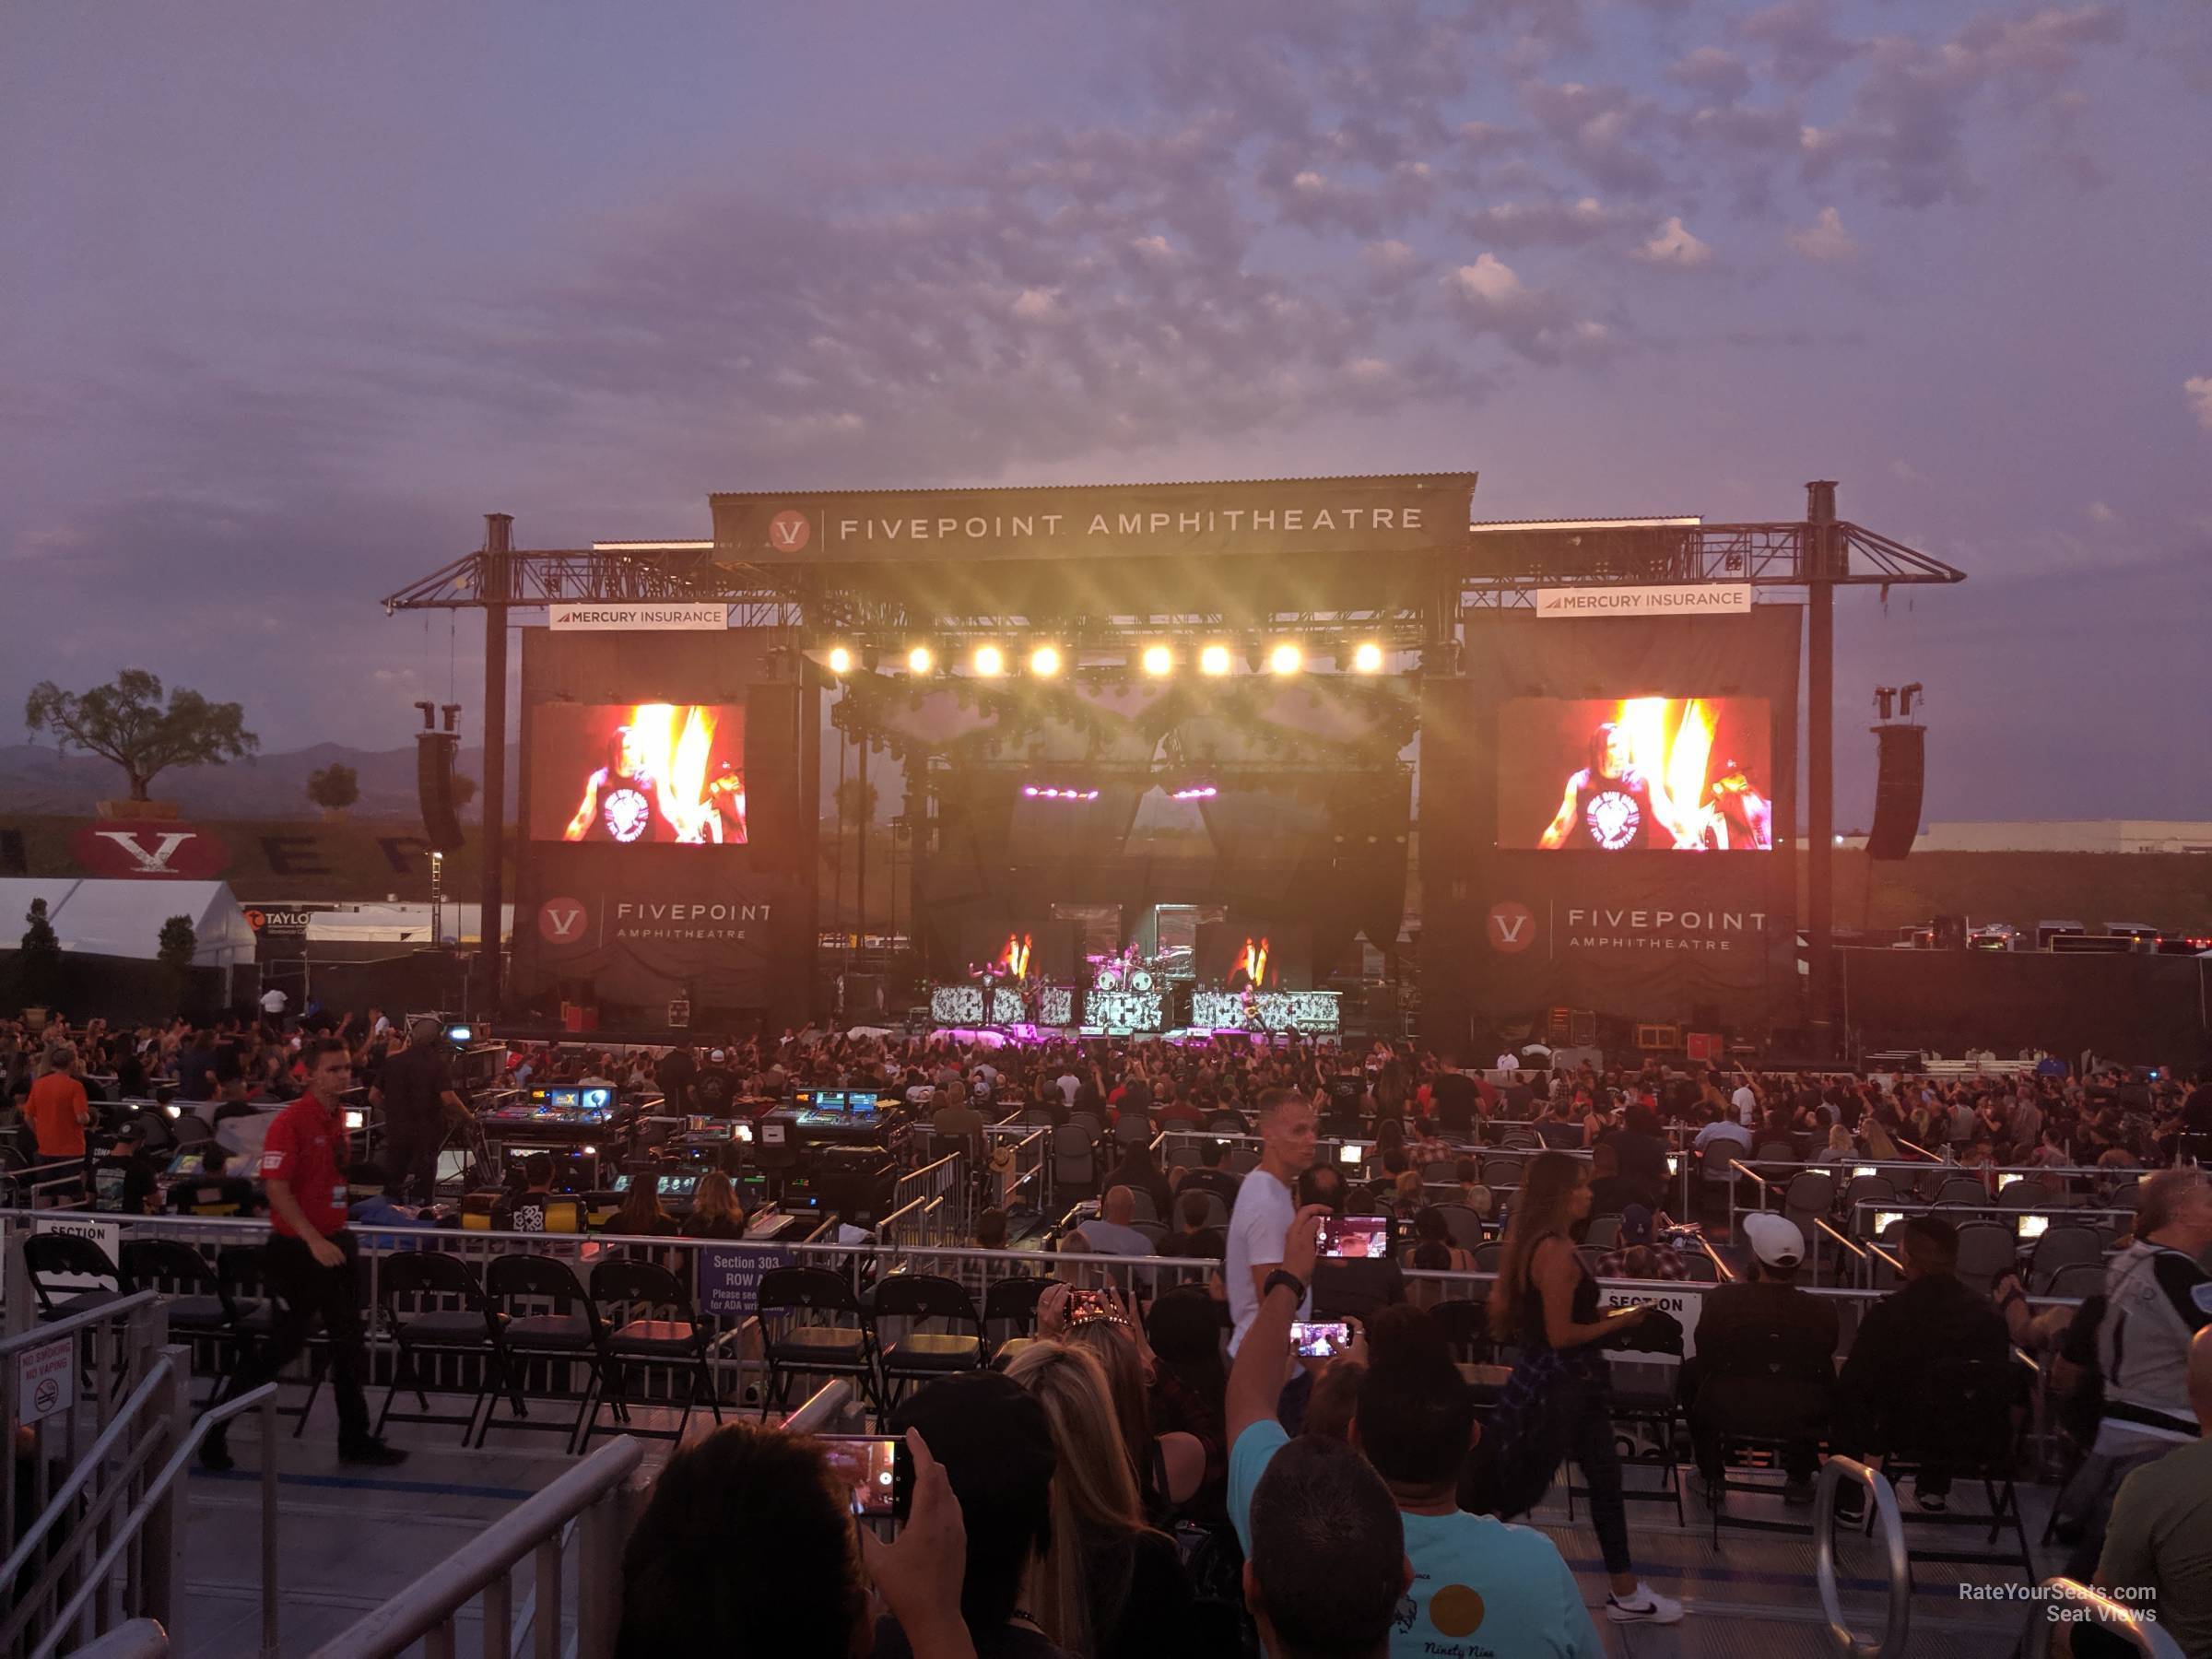 section 303, row 4 seat view  - fivepoint amphitheatre